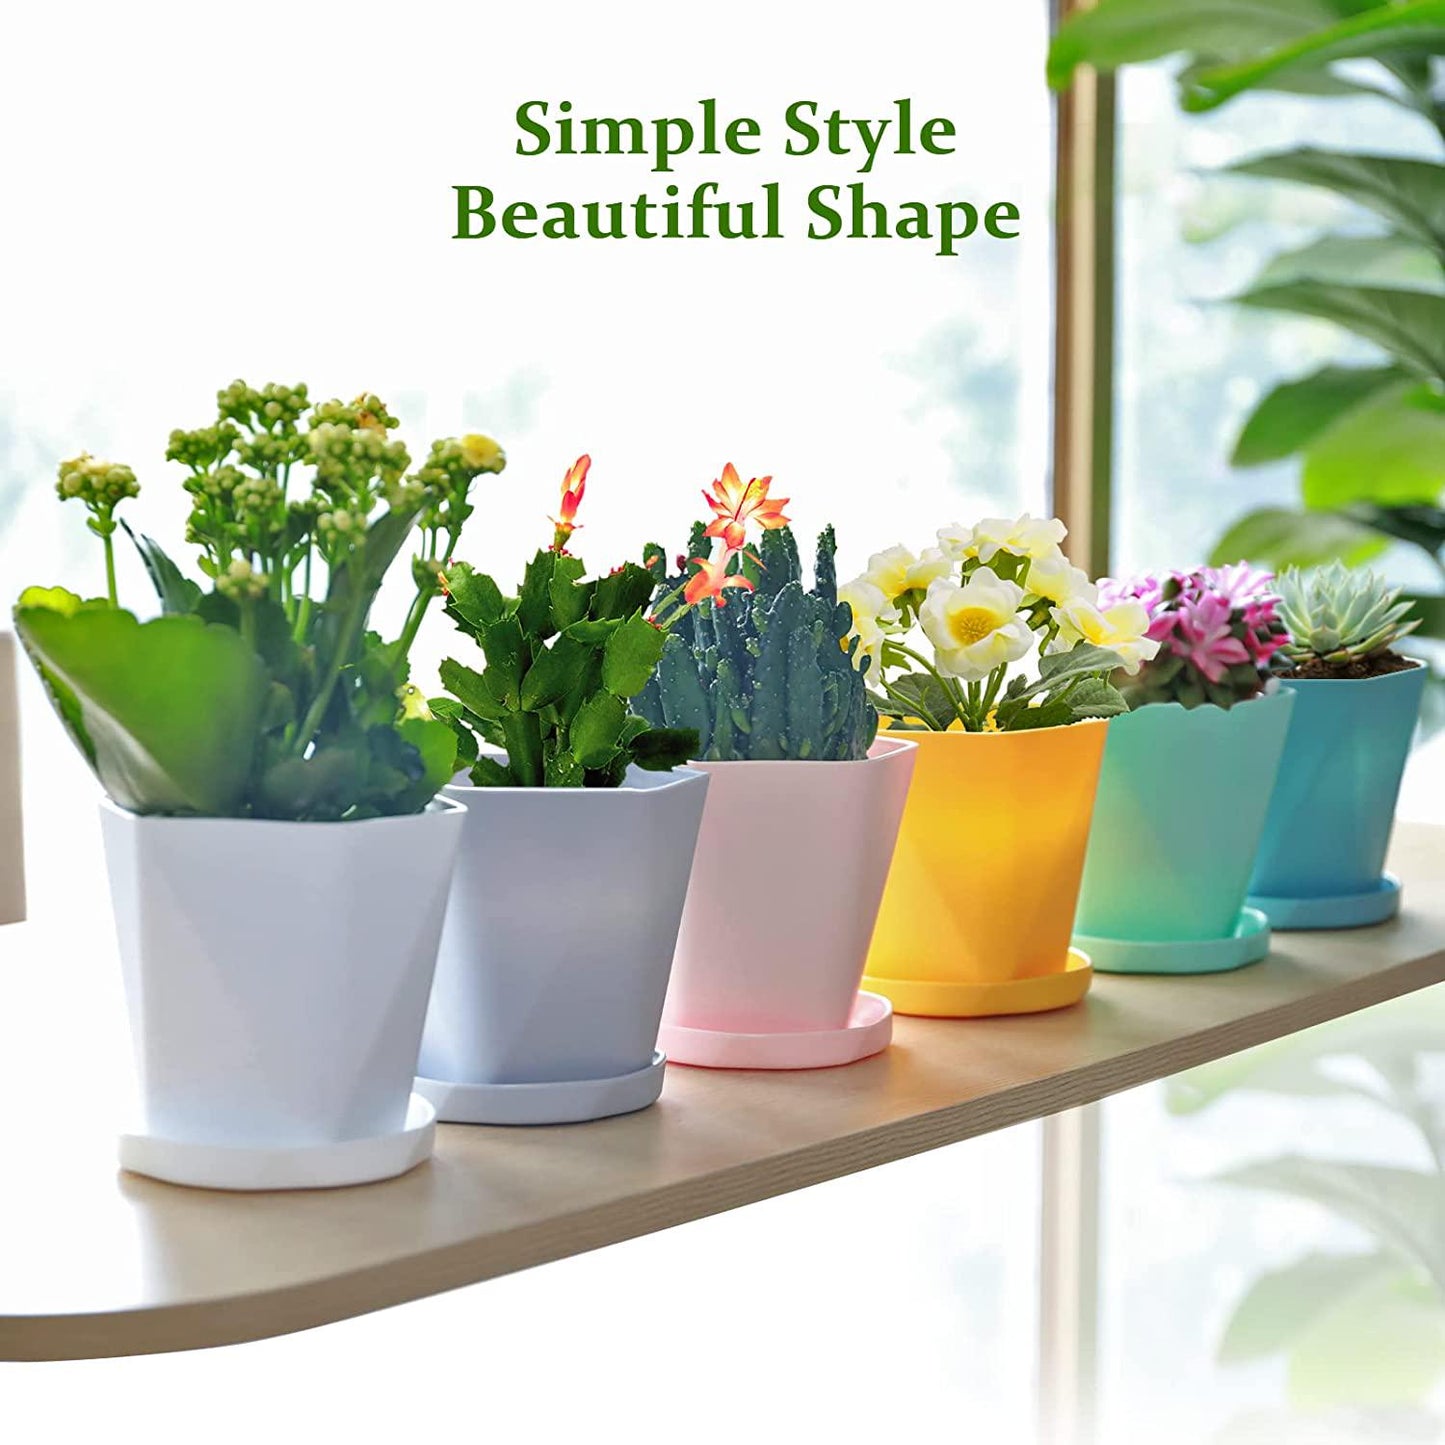 ISIVBPEP Flower Pots - 6 Pack 6.5 Inch Plastic Plant Pots with Drainage Holes and Saucers - Planters for Indoor Plants - Garden Pots with Gardening Tools